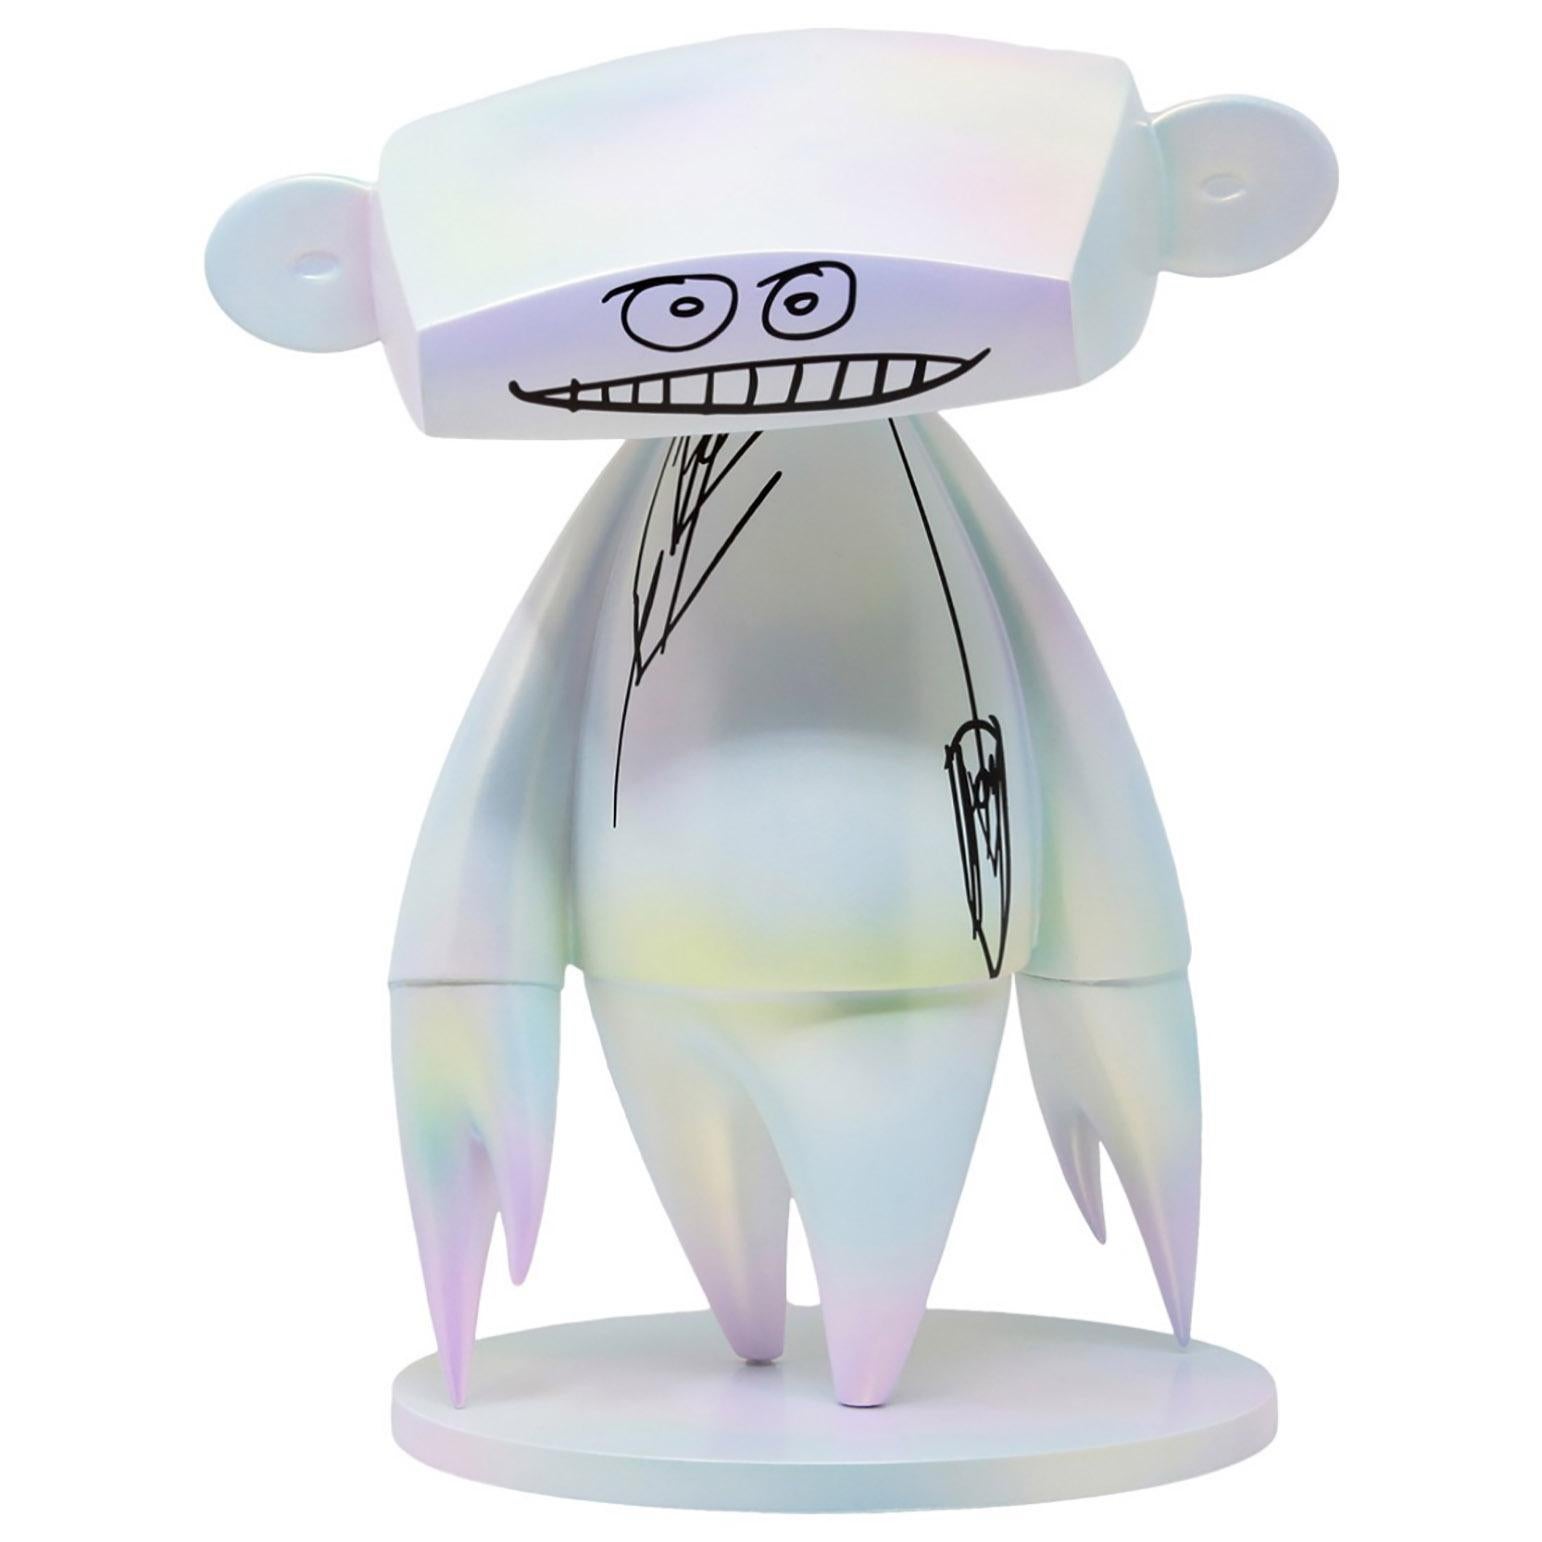 'Johnny' by Futura 2000:
The ‘Johnny’ vinyl art figure from NYC graffiti legend Futura is inspired by a classic 80s horror film. The 10-inch figure features a stylized rendition of his signature character style with loose, sketch-like features and a